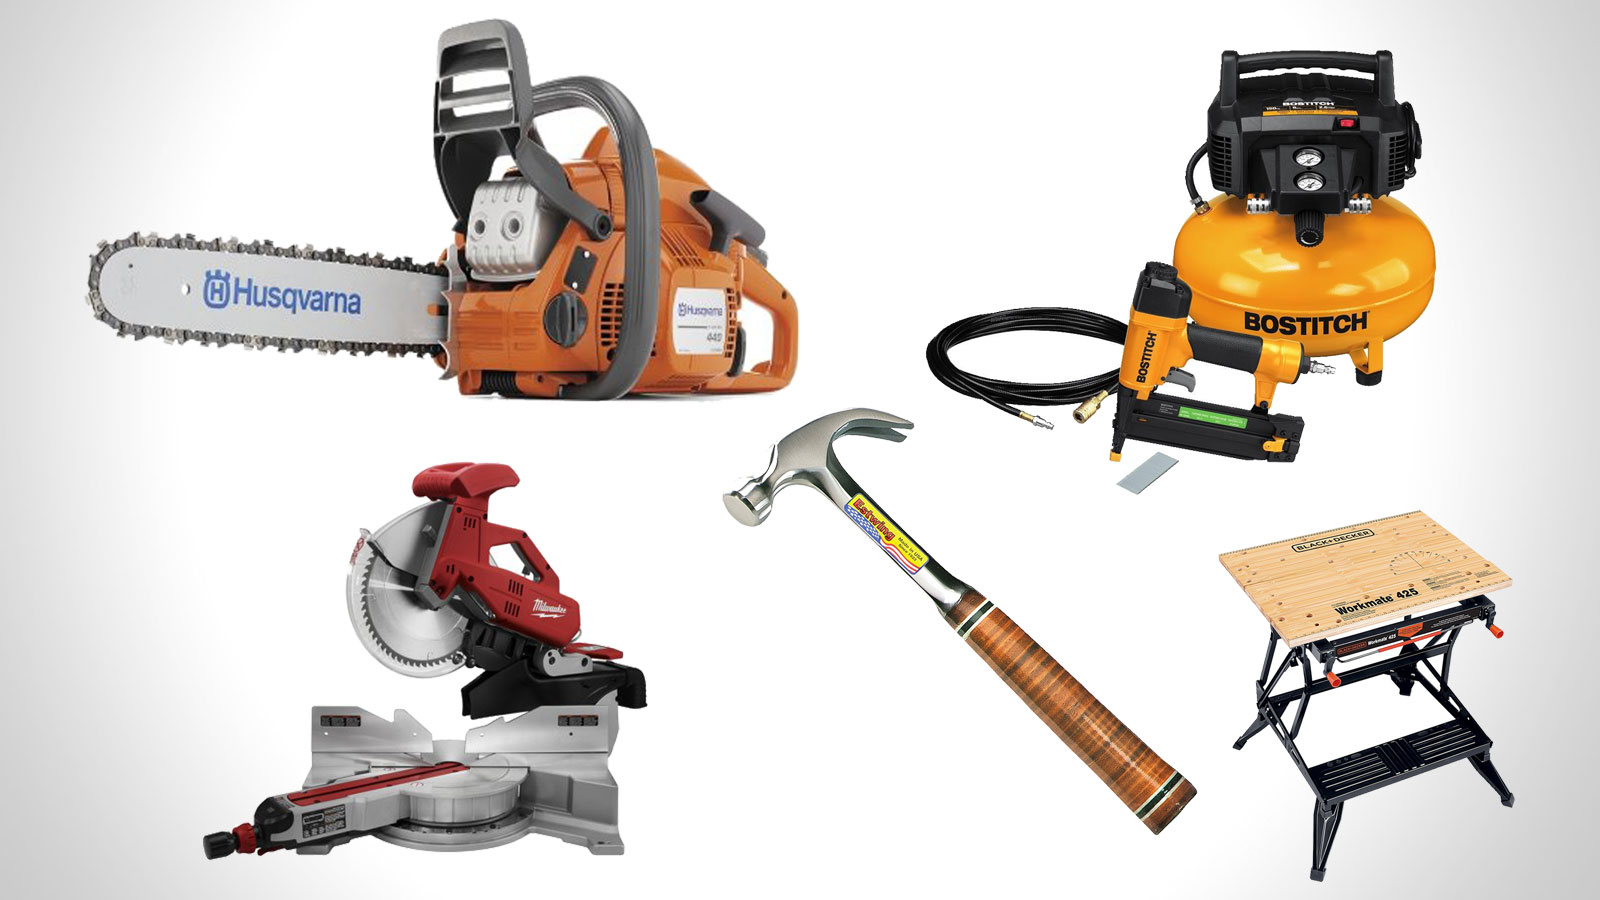 Gifts For Men: The Best Tool Gift Ideas